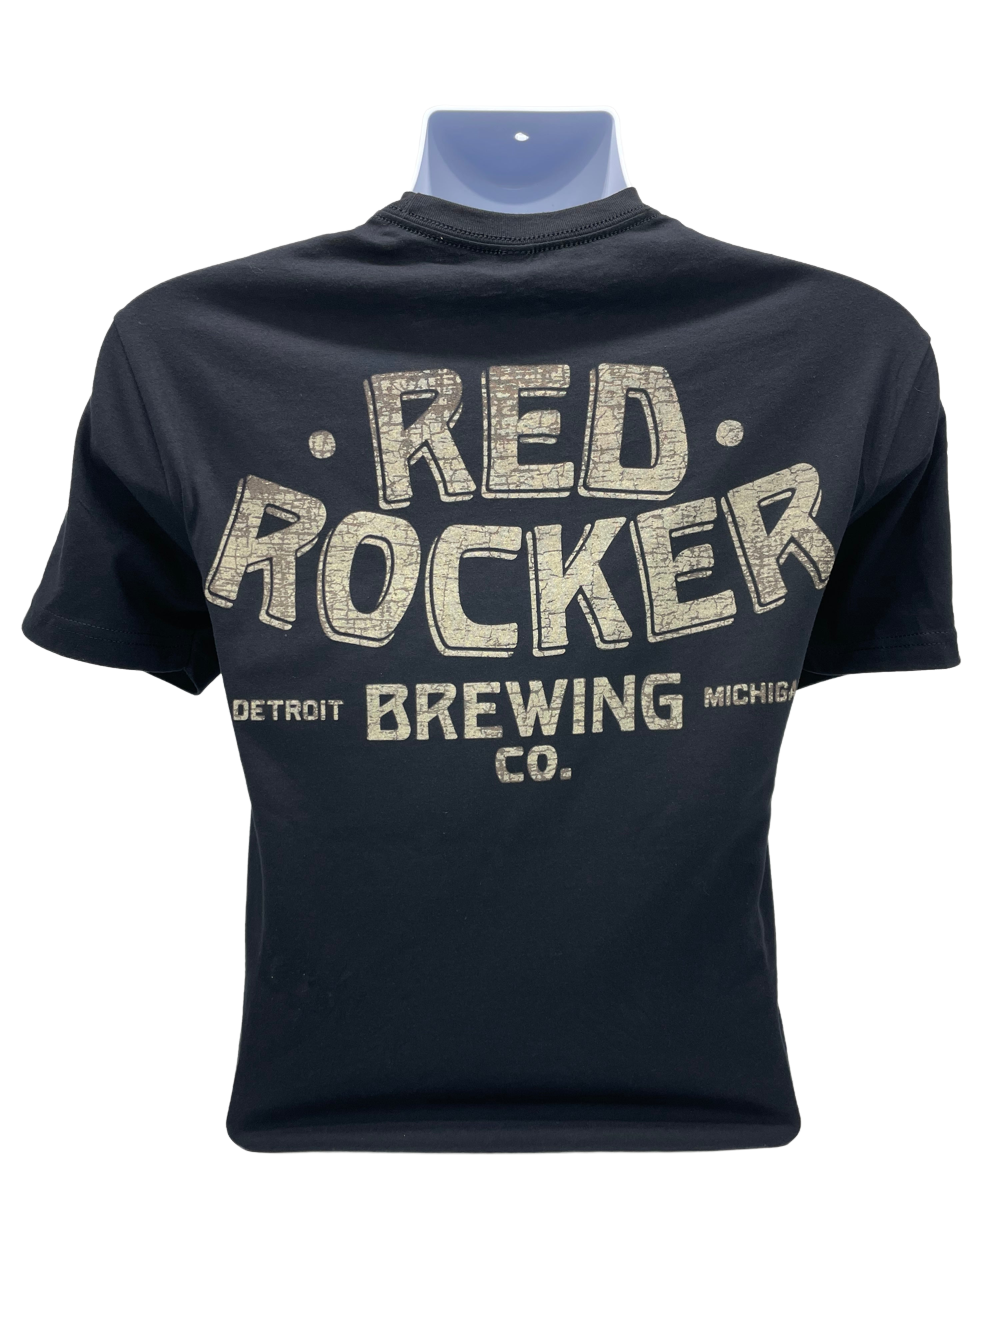 Double-sided Red Rocker Brewing Co. T-shirt